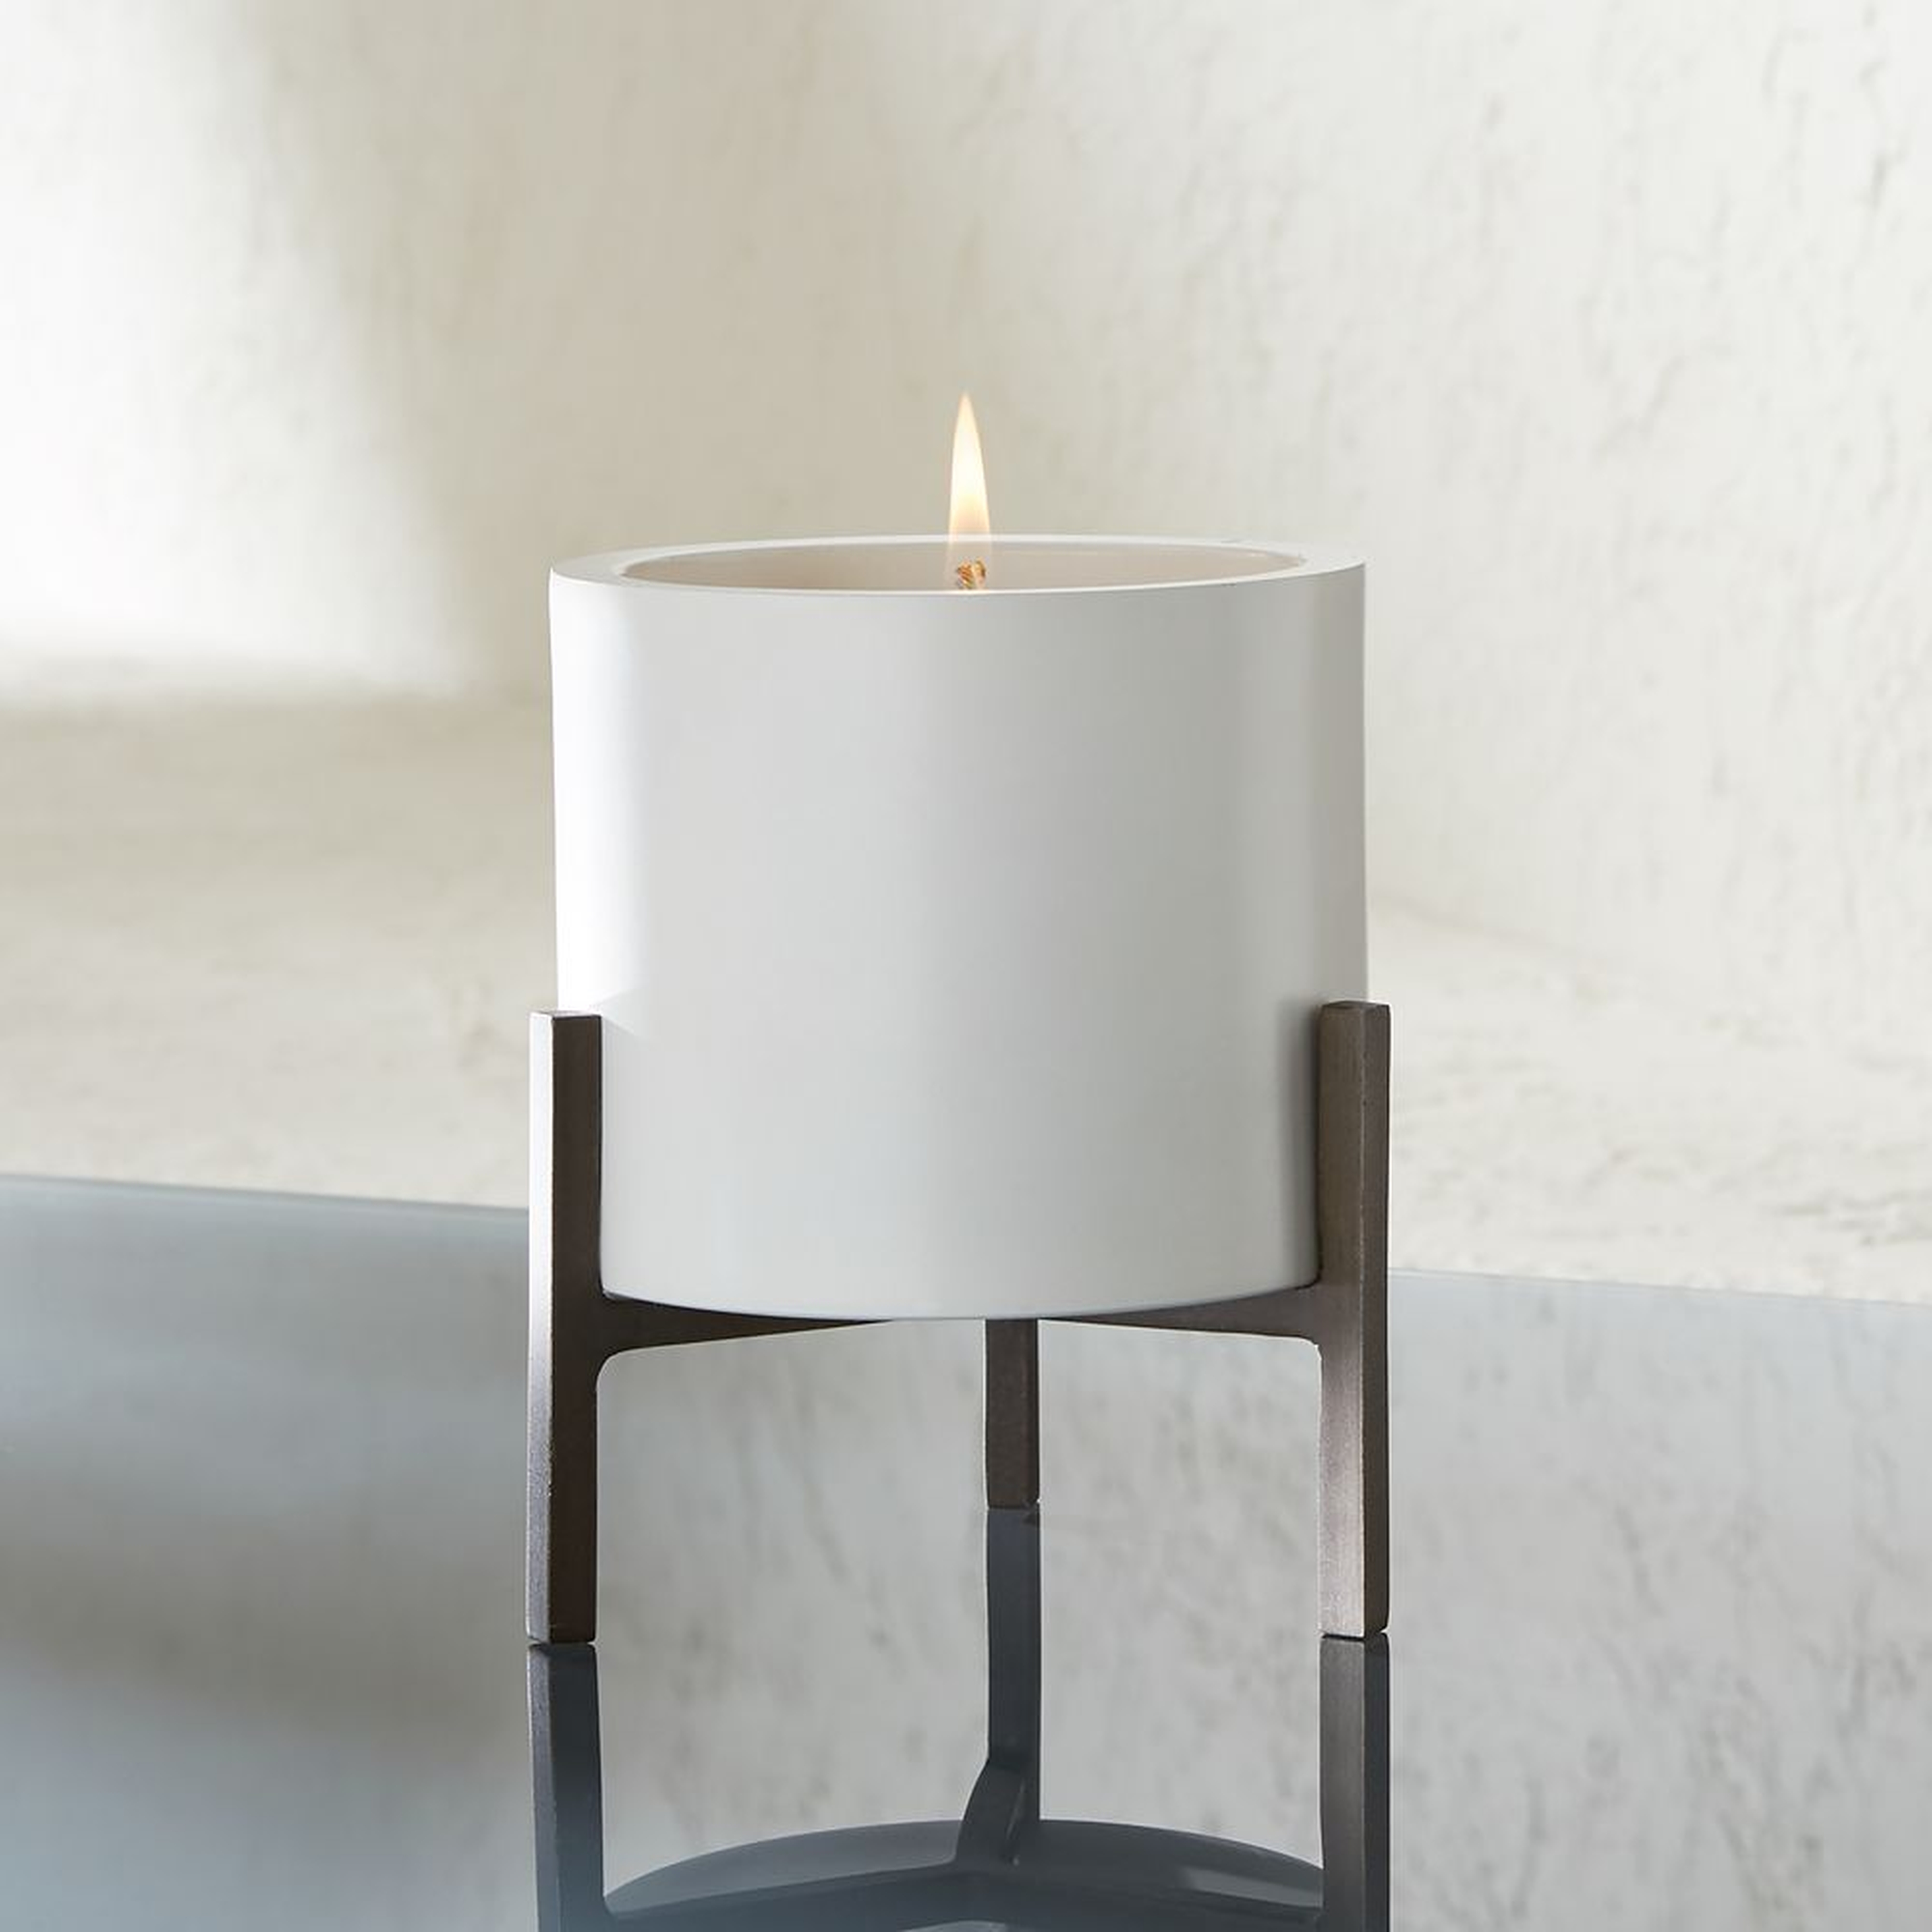 Dundee Citronella Candle - Crate and Barrel